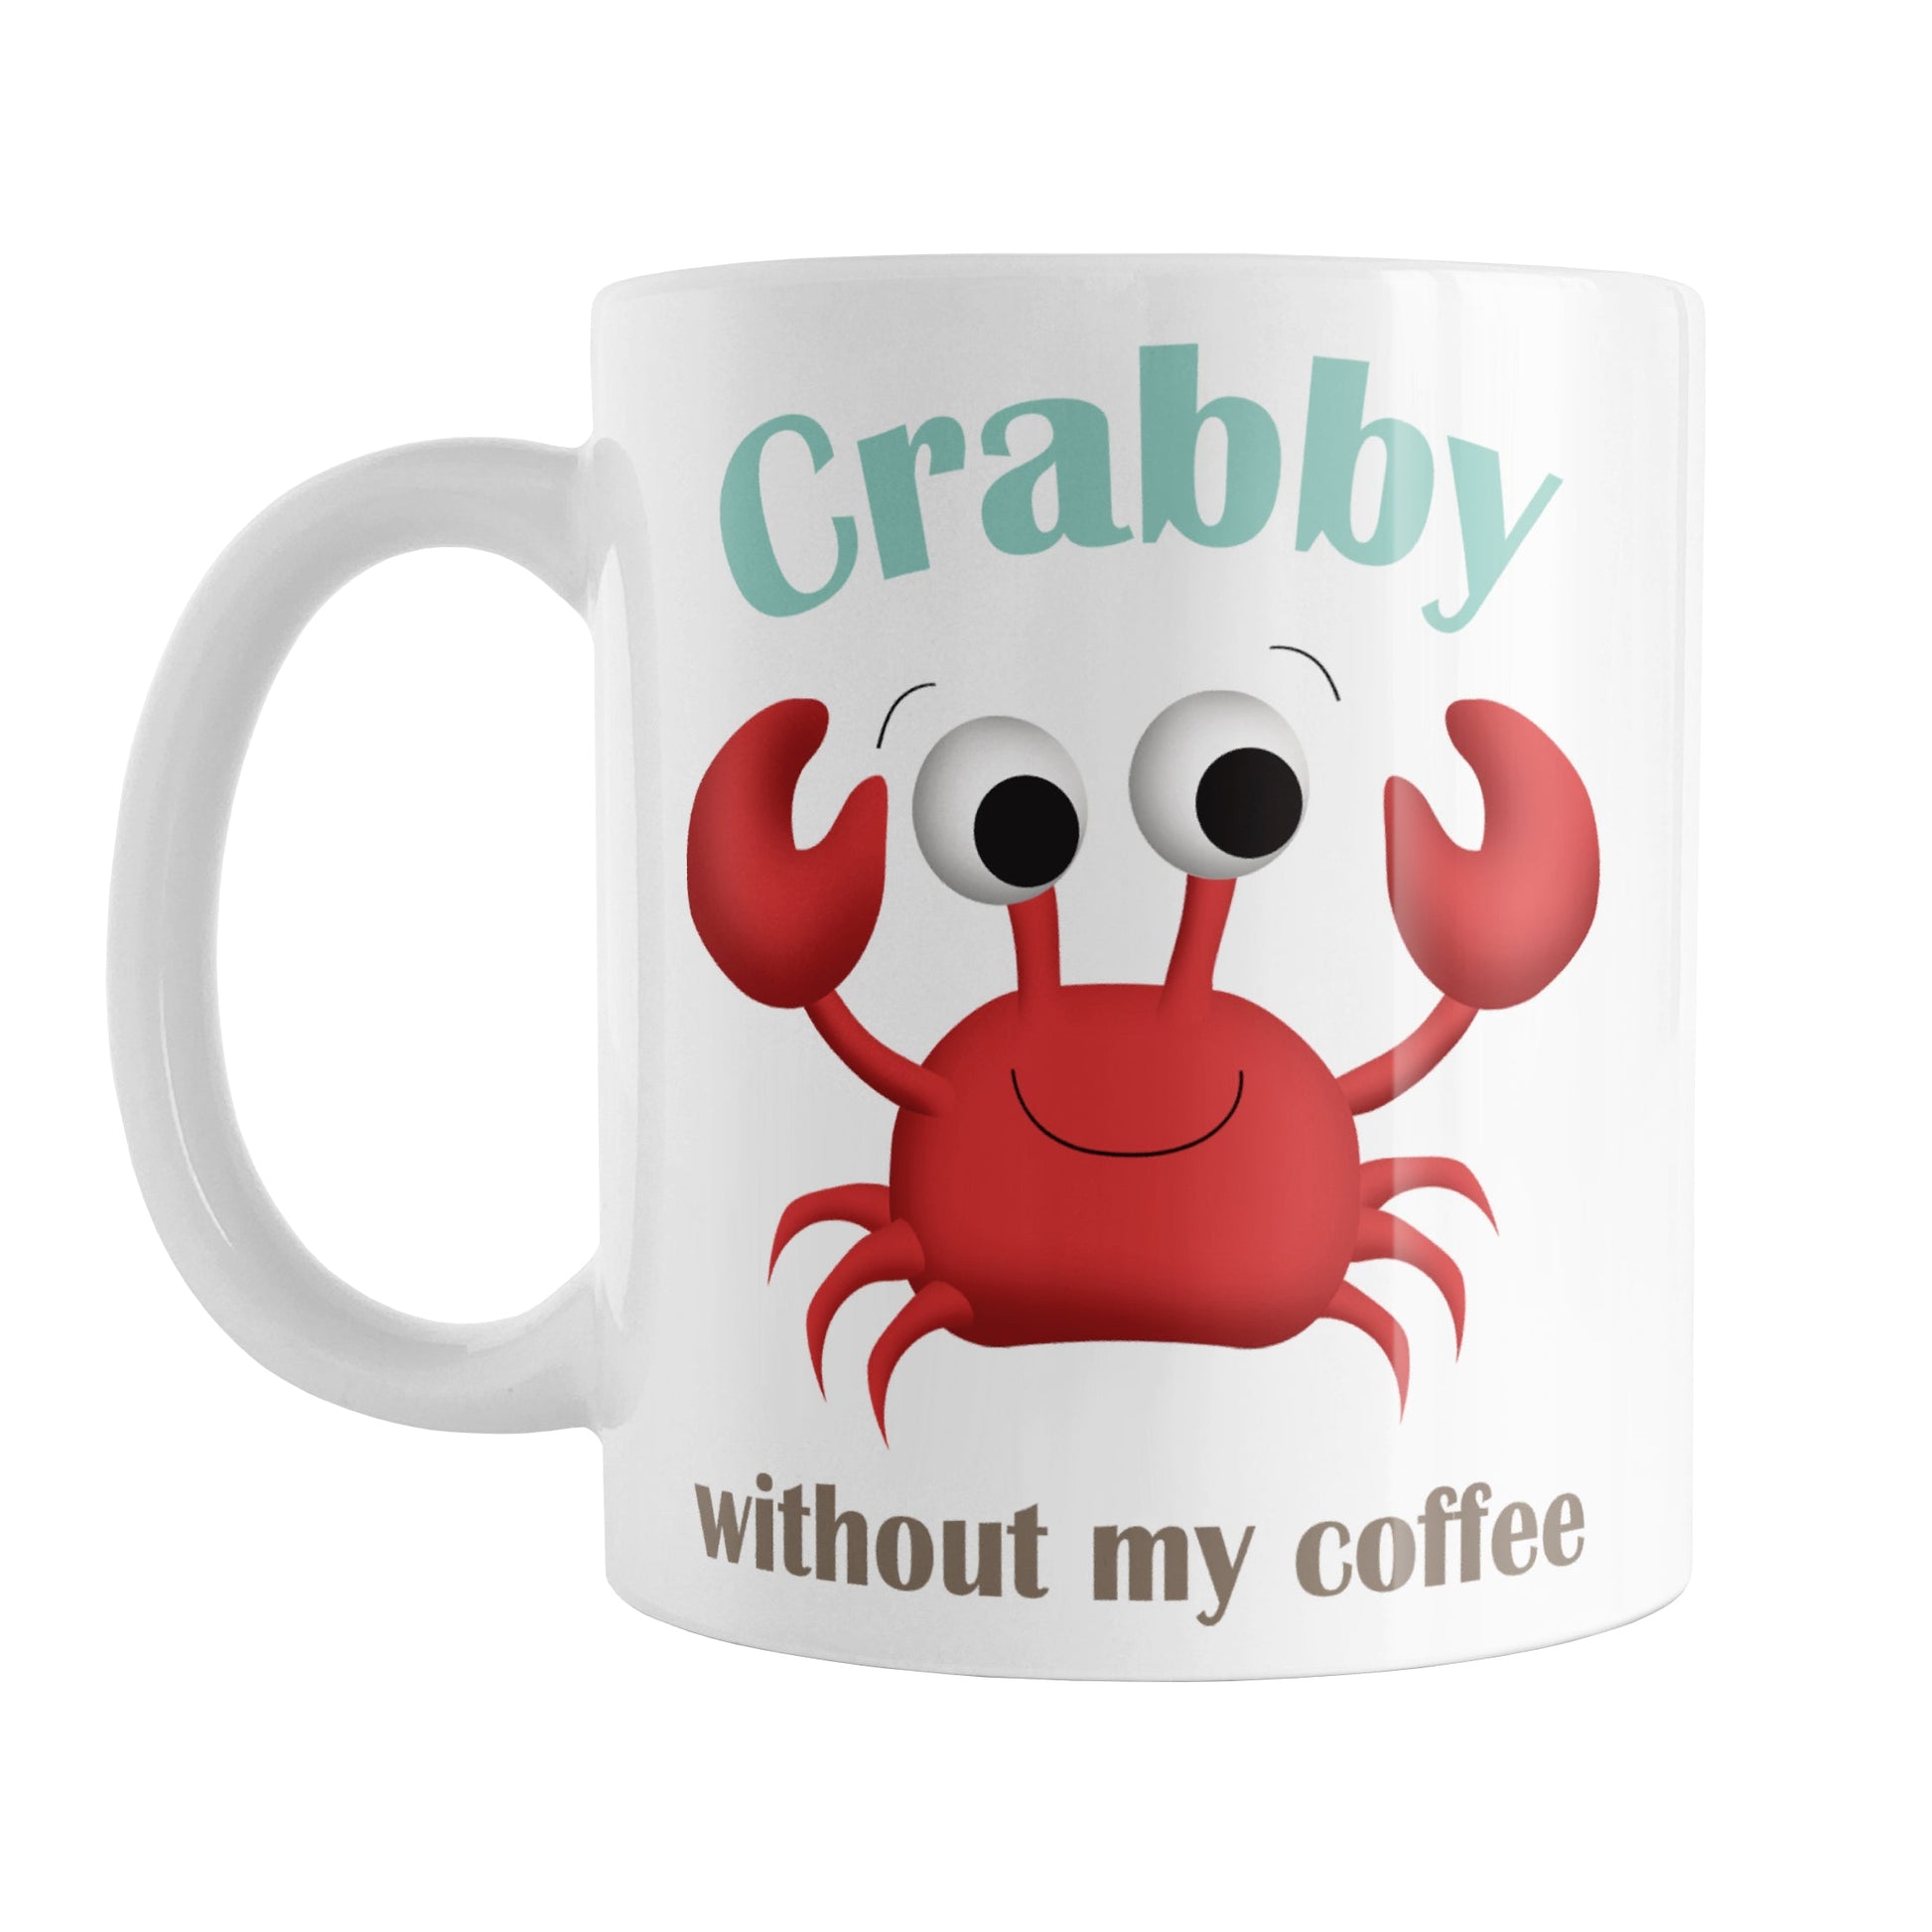 Crabby without my Coffee - Cute Crab Mug (11oz) at Amy's Coffee Mugs